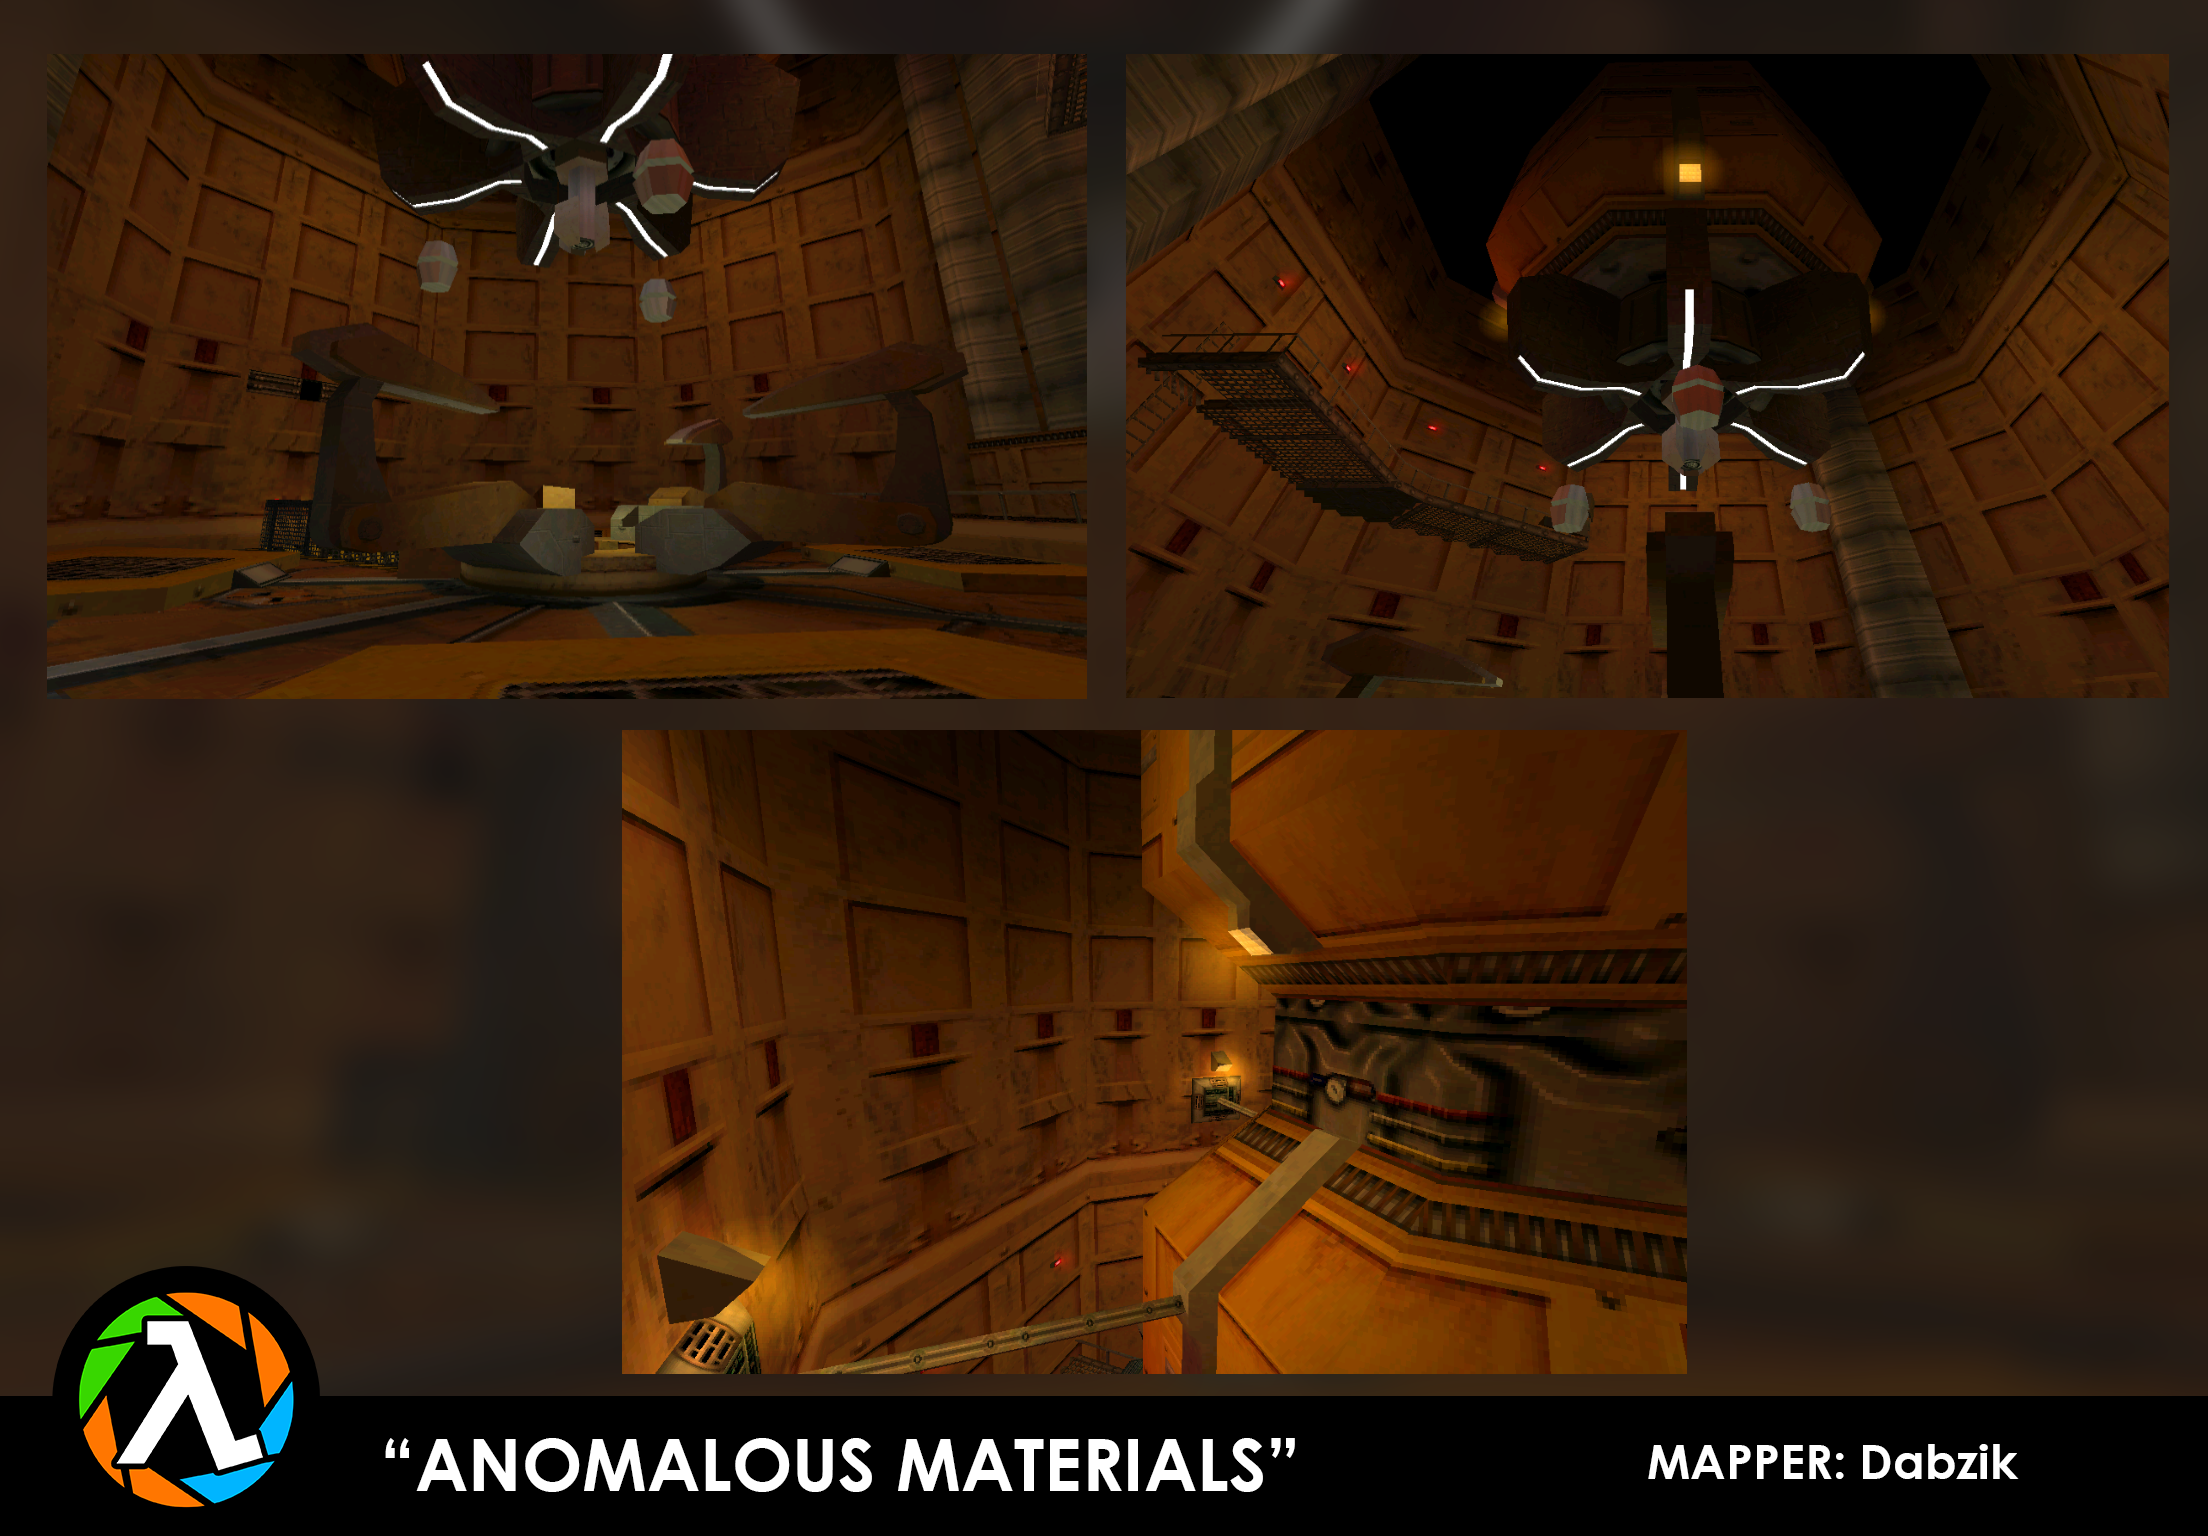 A Cross-Dimensional Update news - Half-Life Arena (2021) mod for